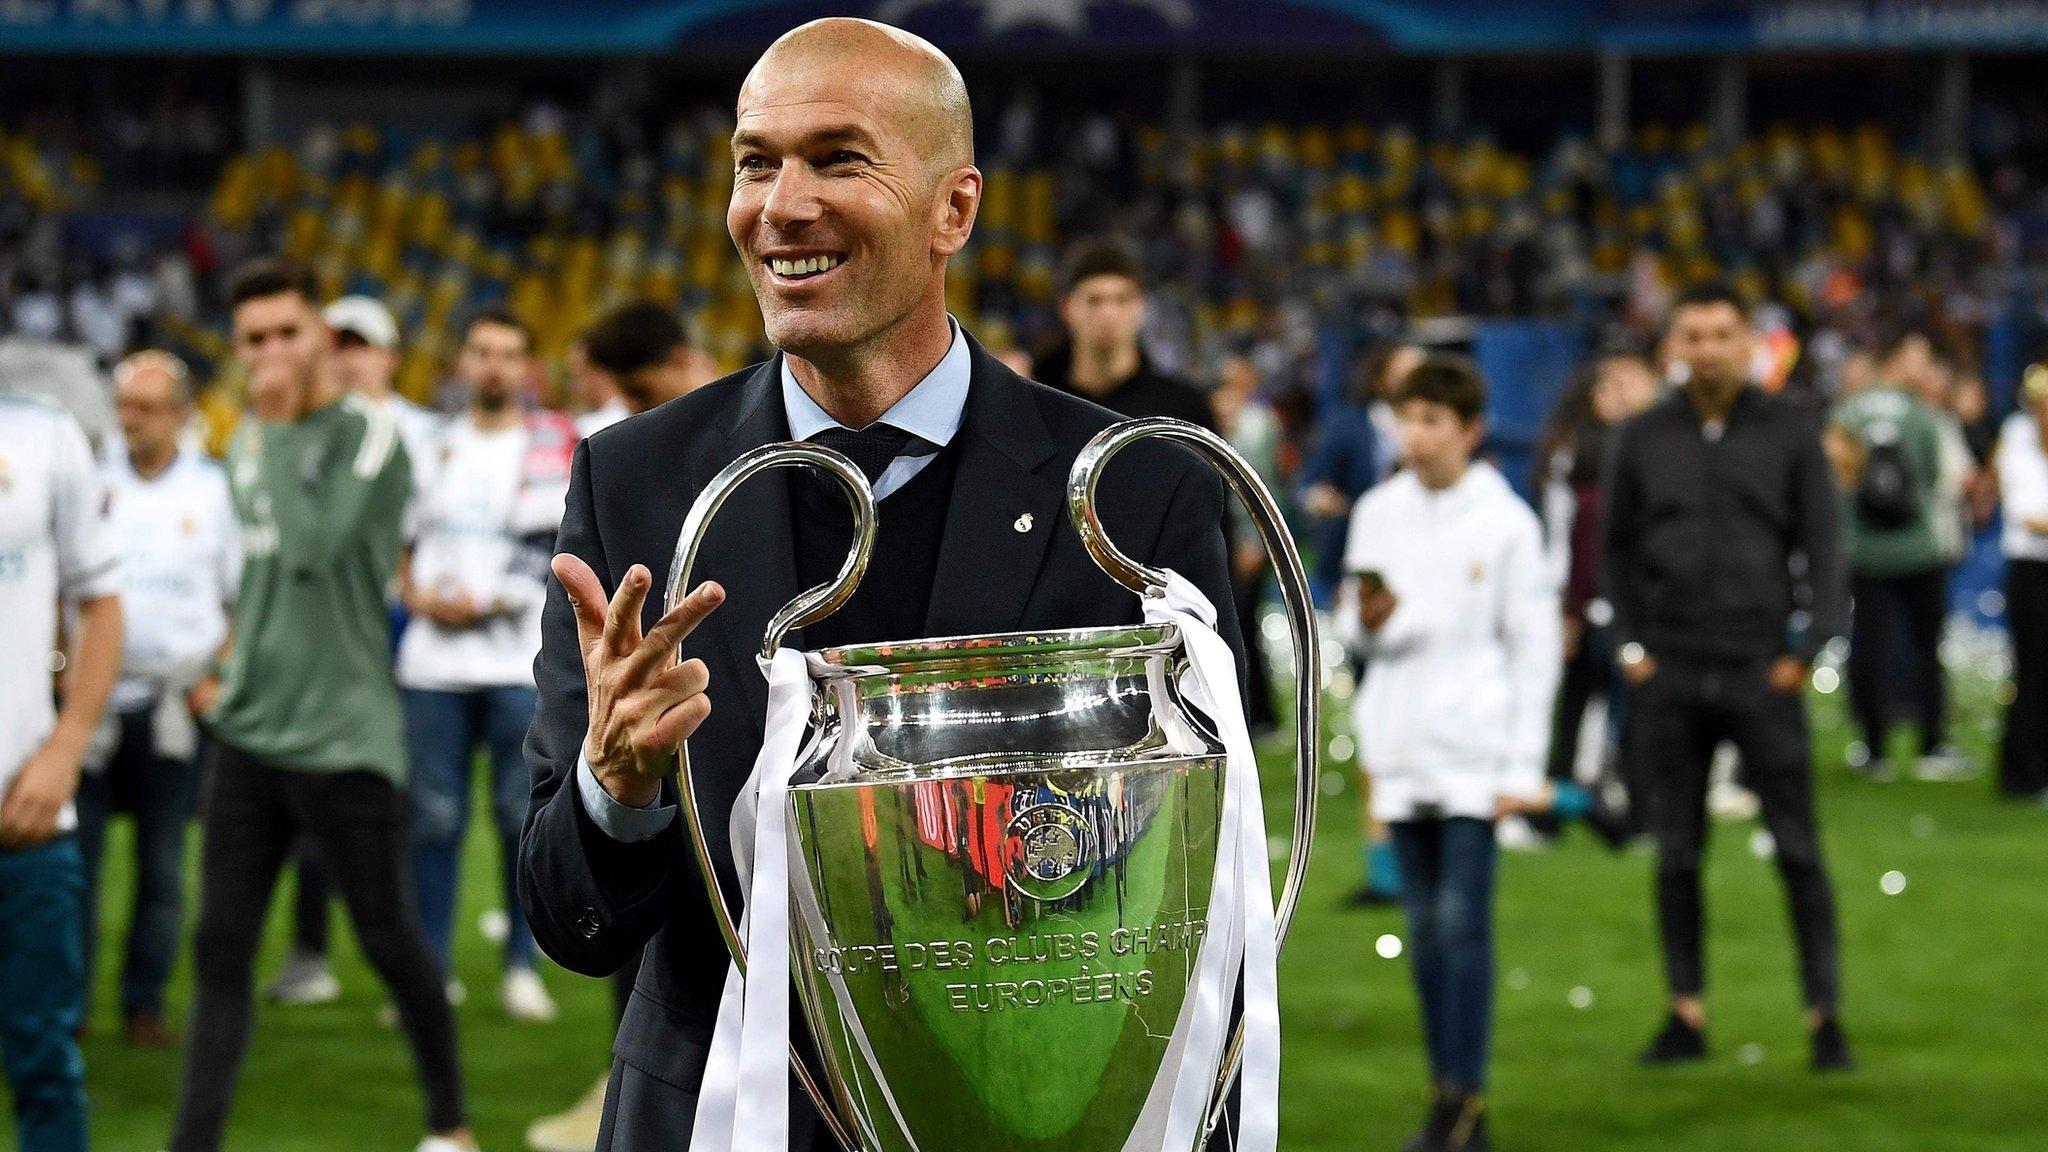 101821690 hi047072907 Zinedine Zidane confirms that he will be back at coaching soon, amid Manchester United links